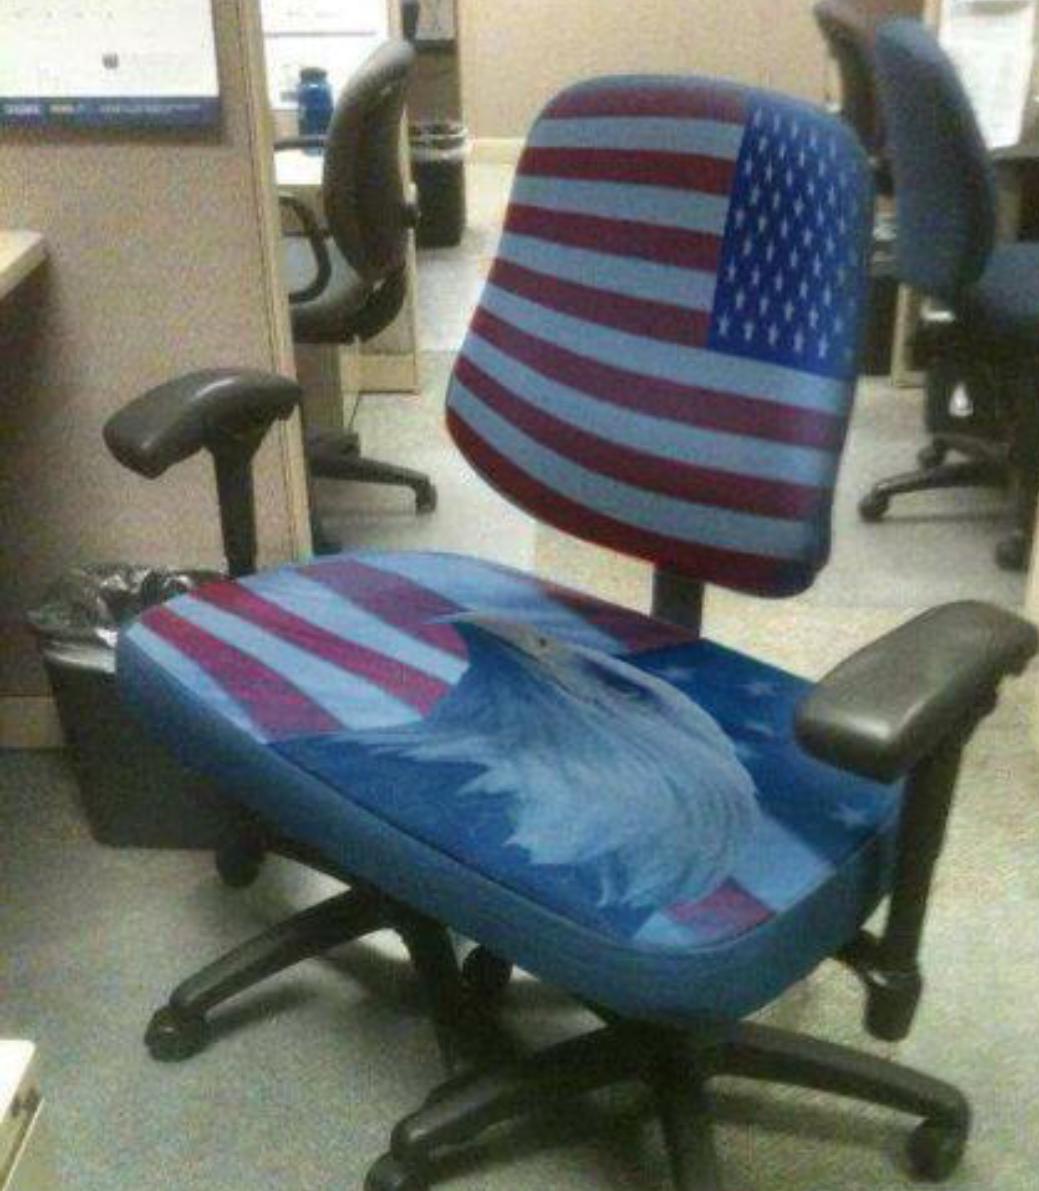 The chair of patriotism.